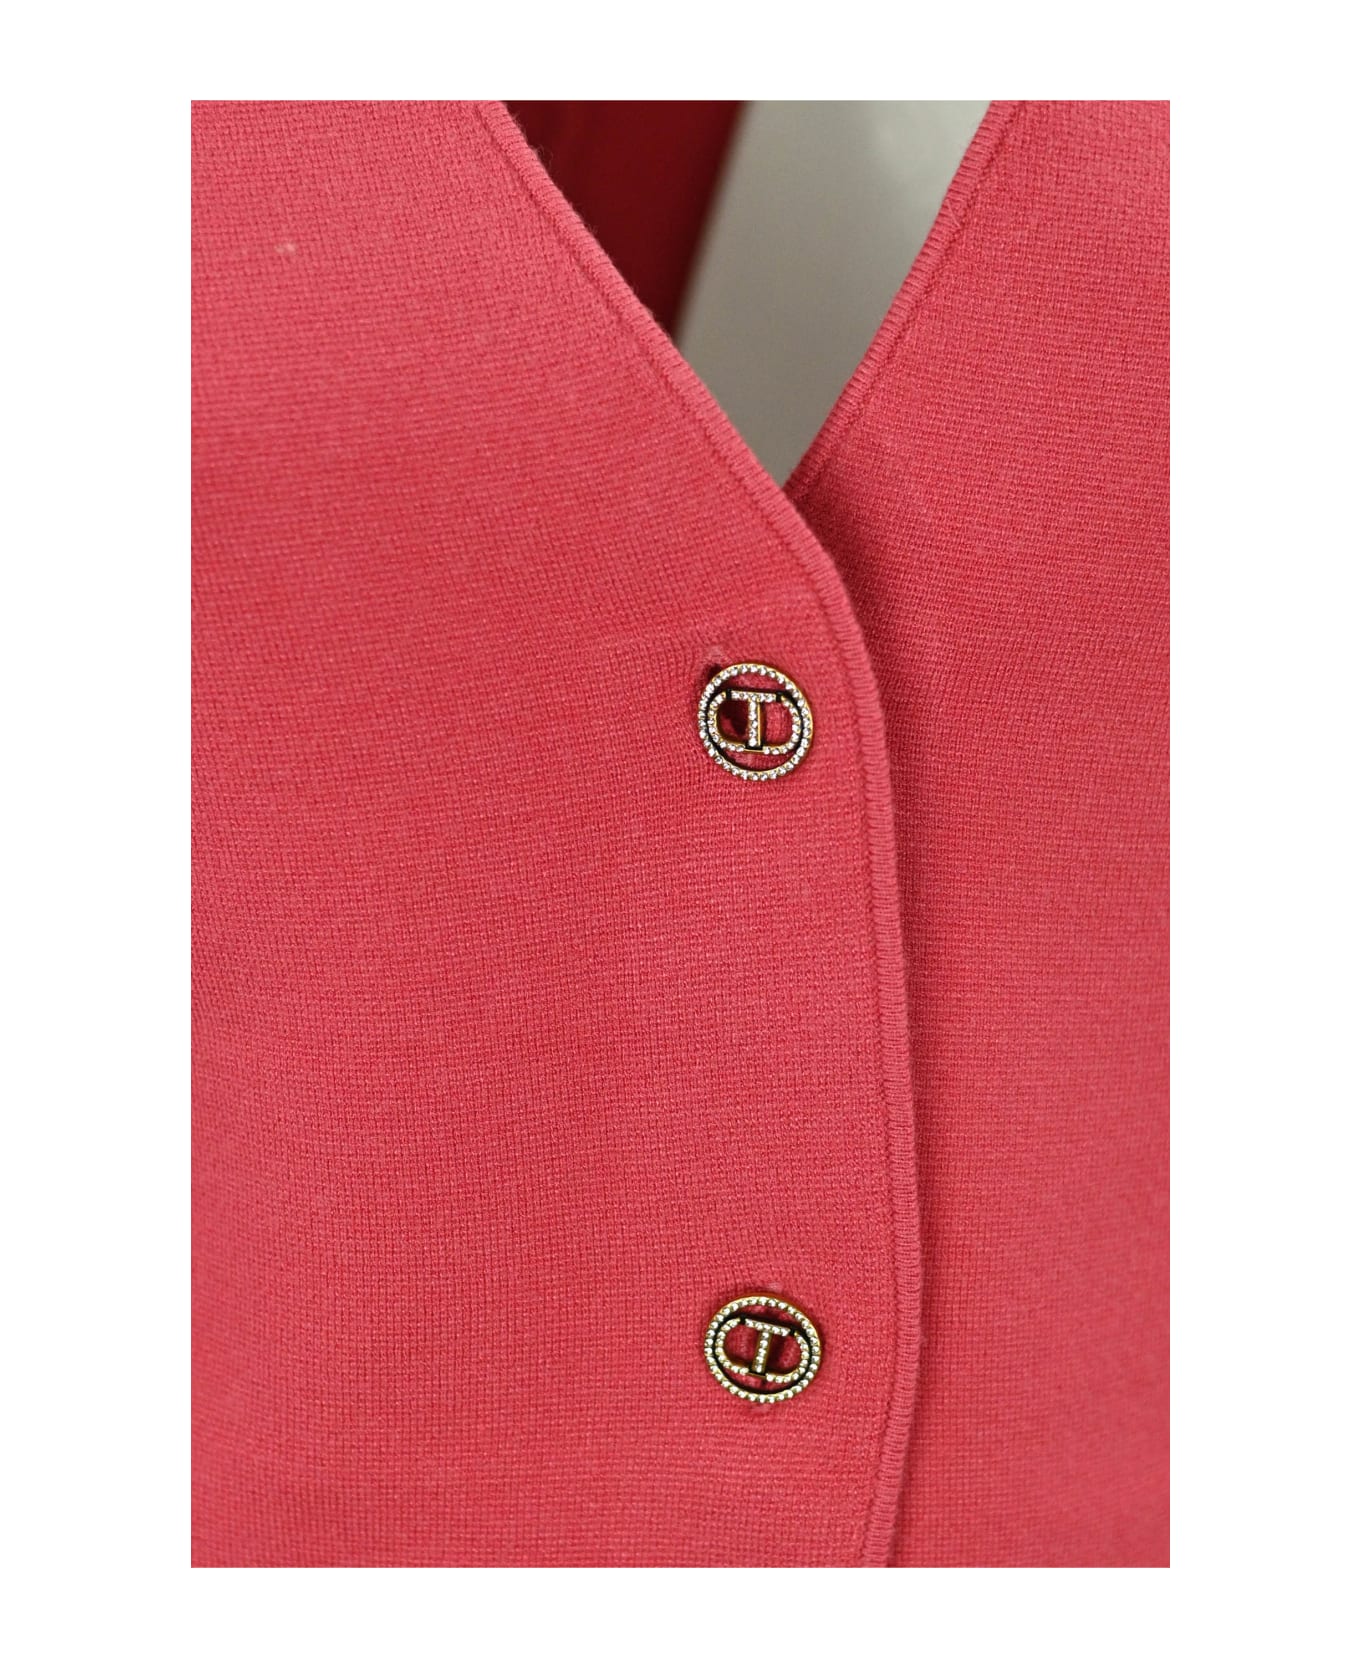 TwinSet Cardigan Jacket With Buttons TwinSet - RED